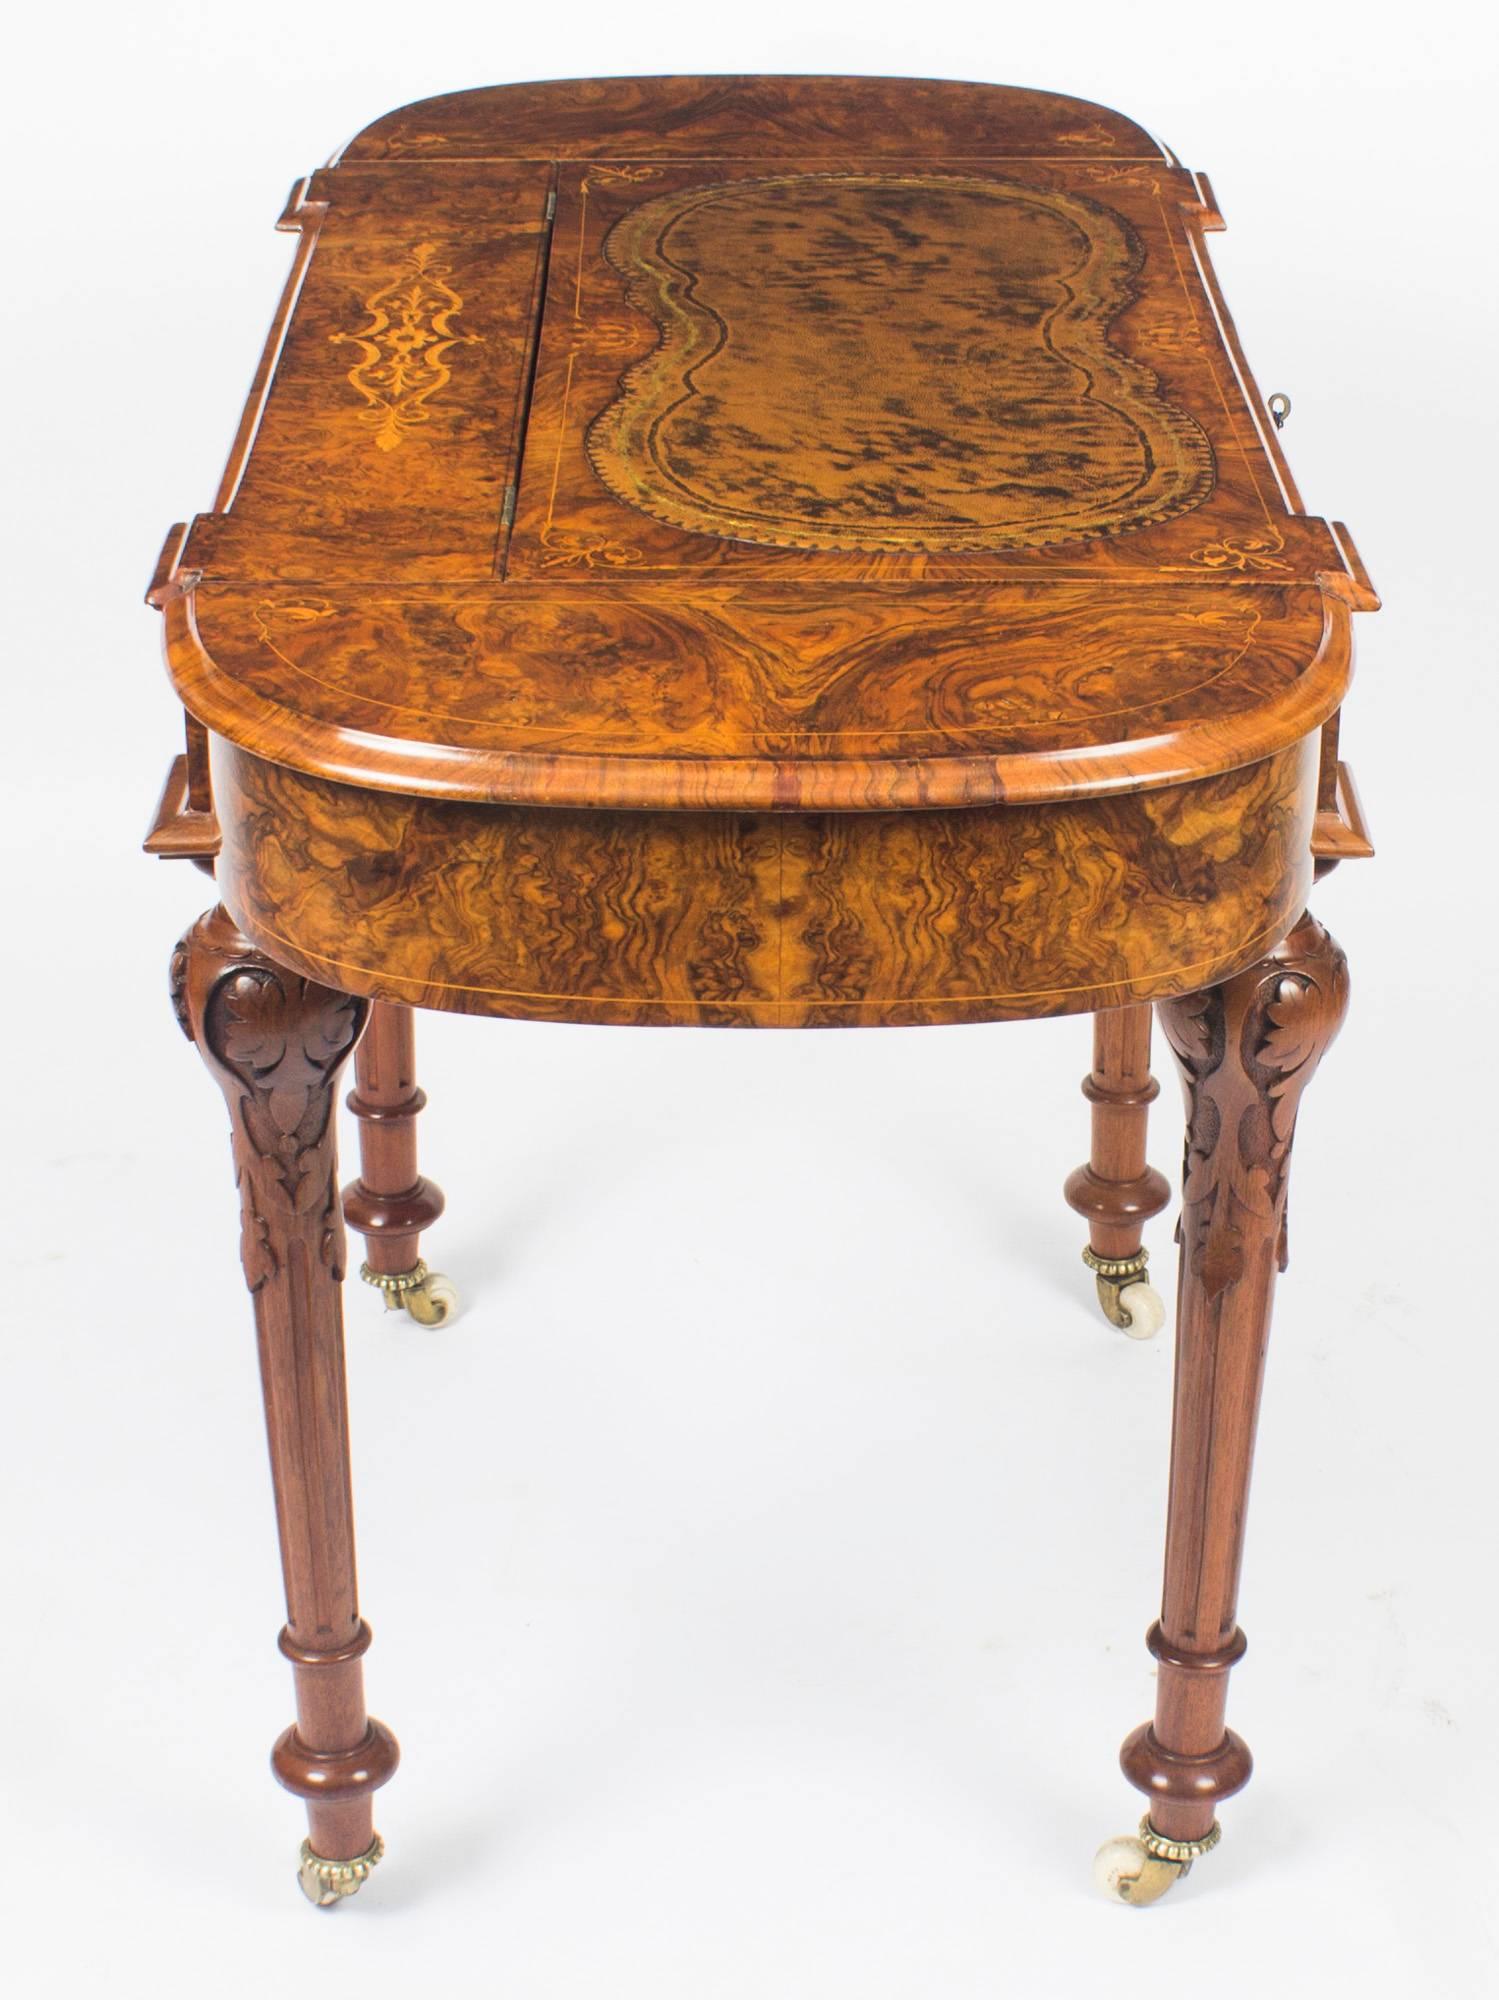 Victorian Antique Burr Walnut and Marquetry Writing Table Desk, 19th Century